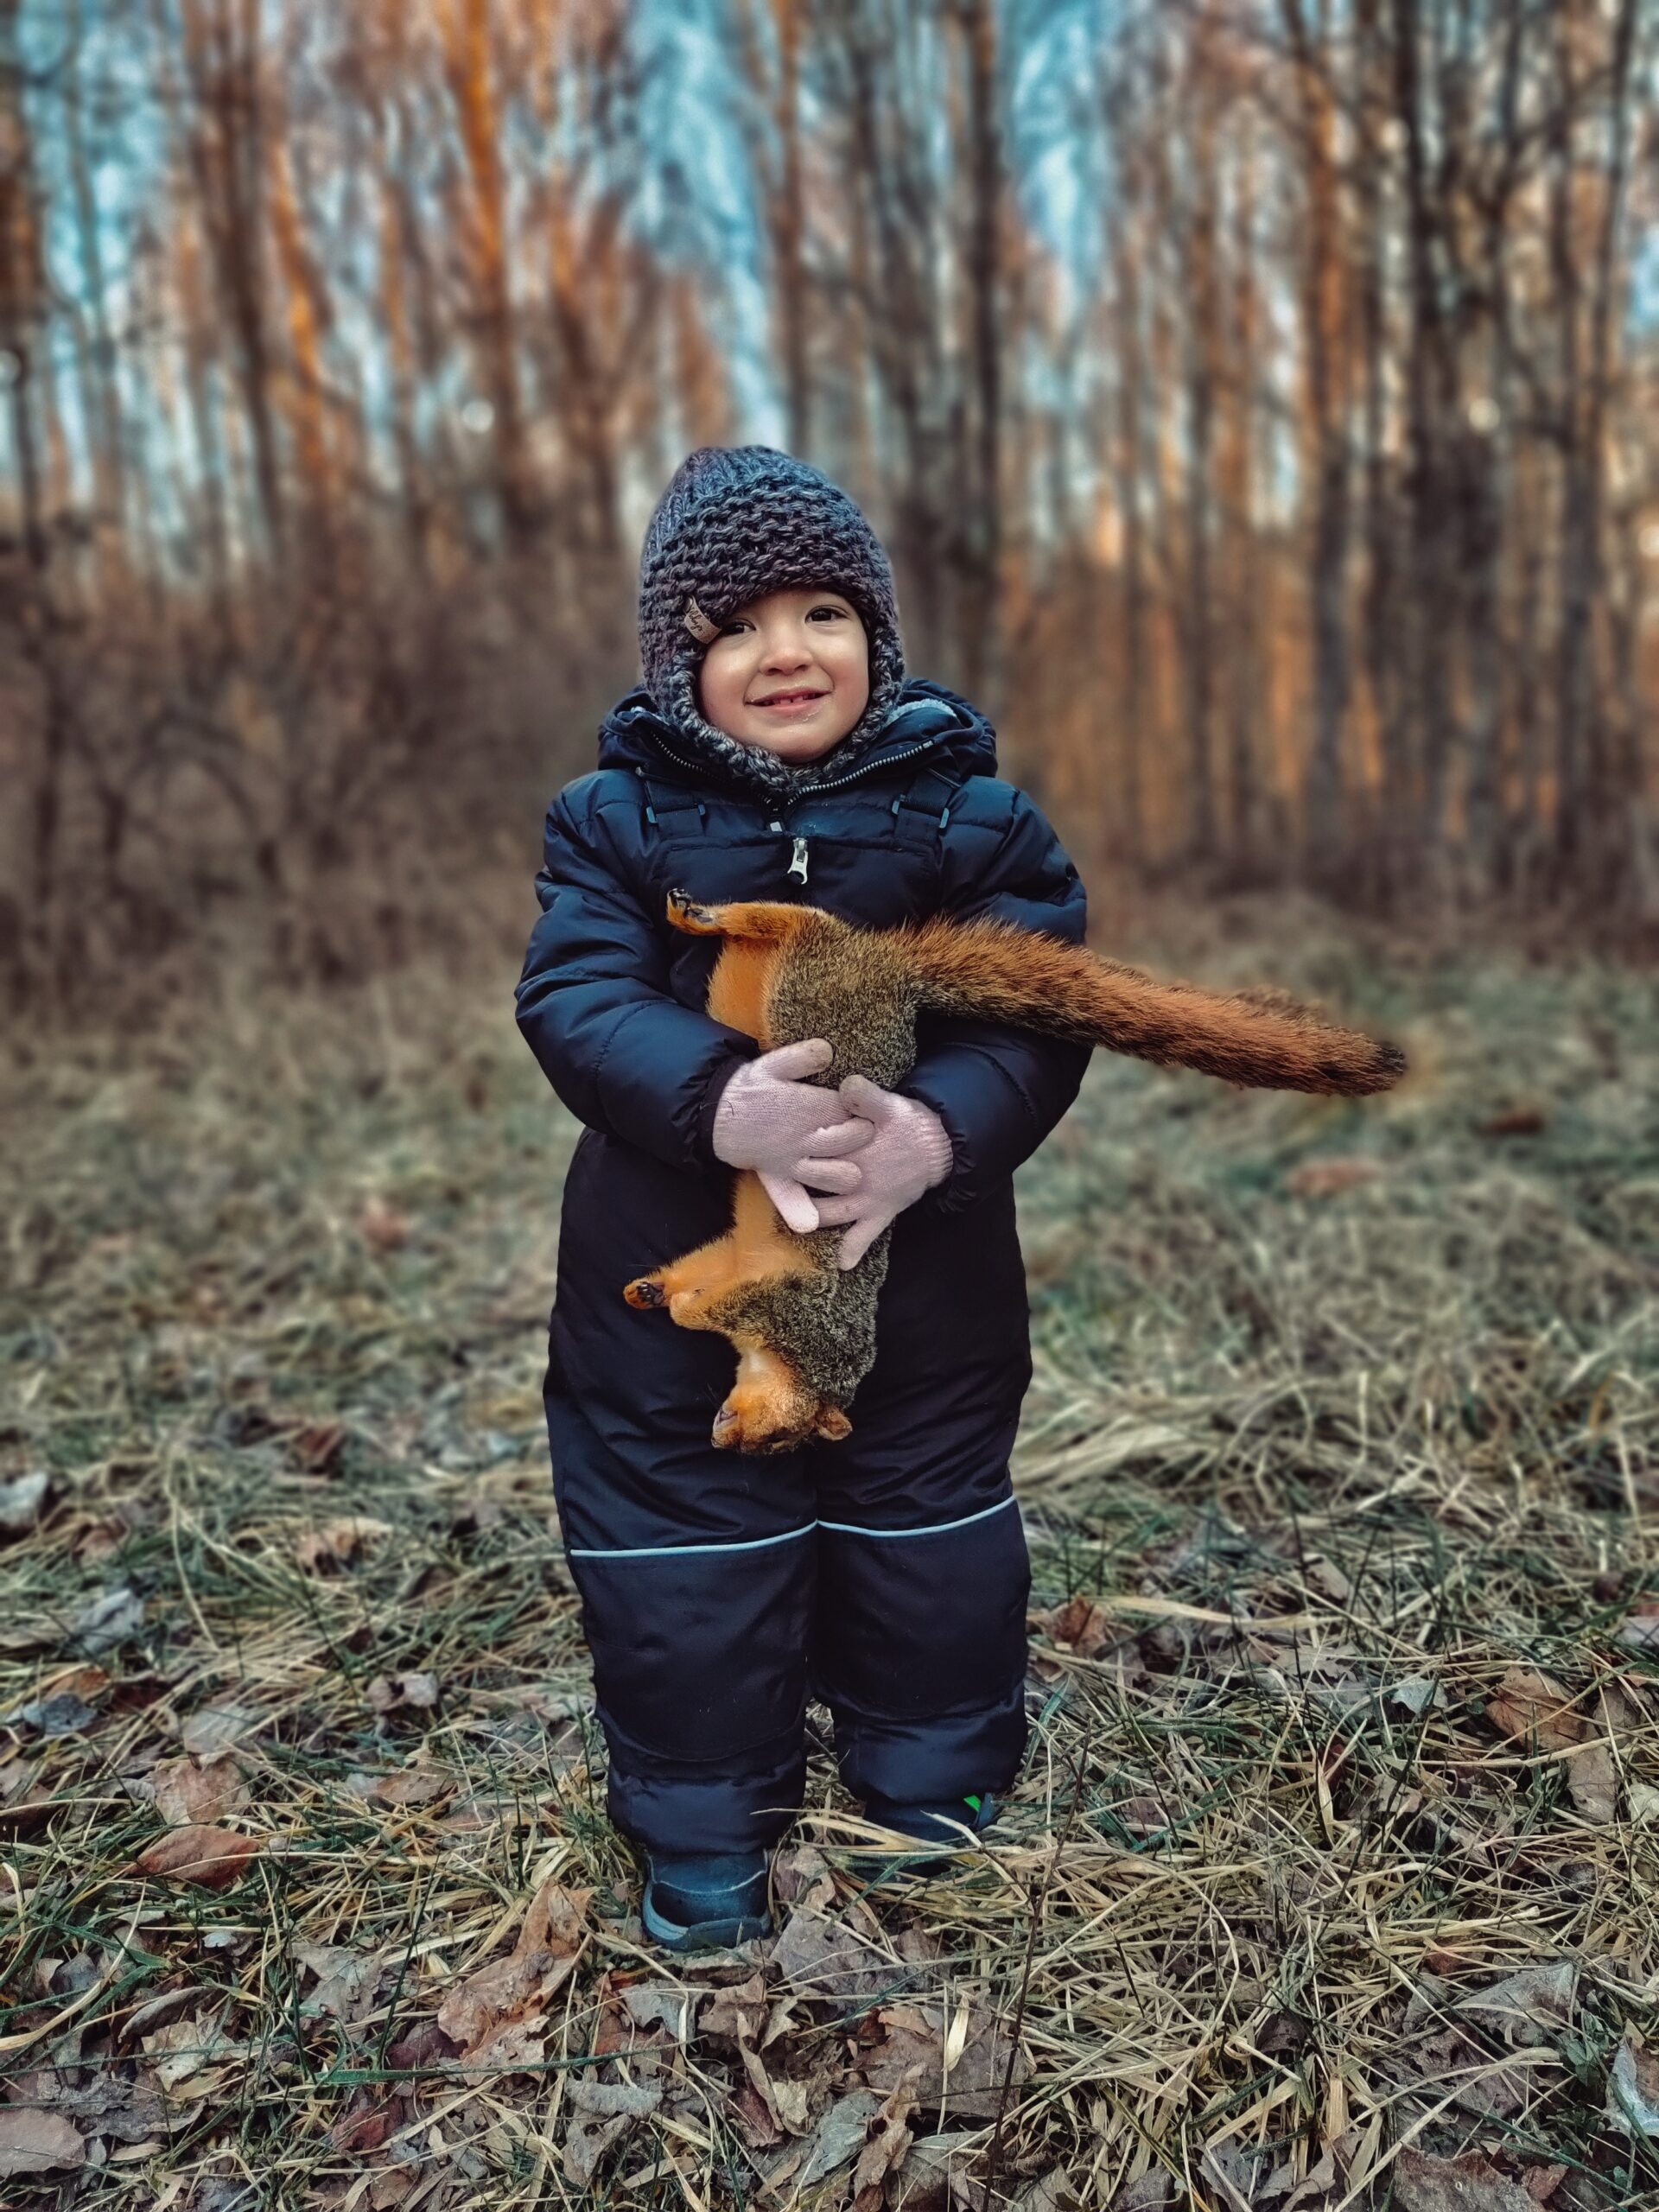 A young kid in a snow suit holds a fox squirrel and smiles.